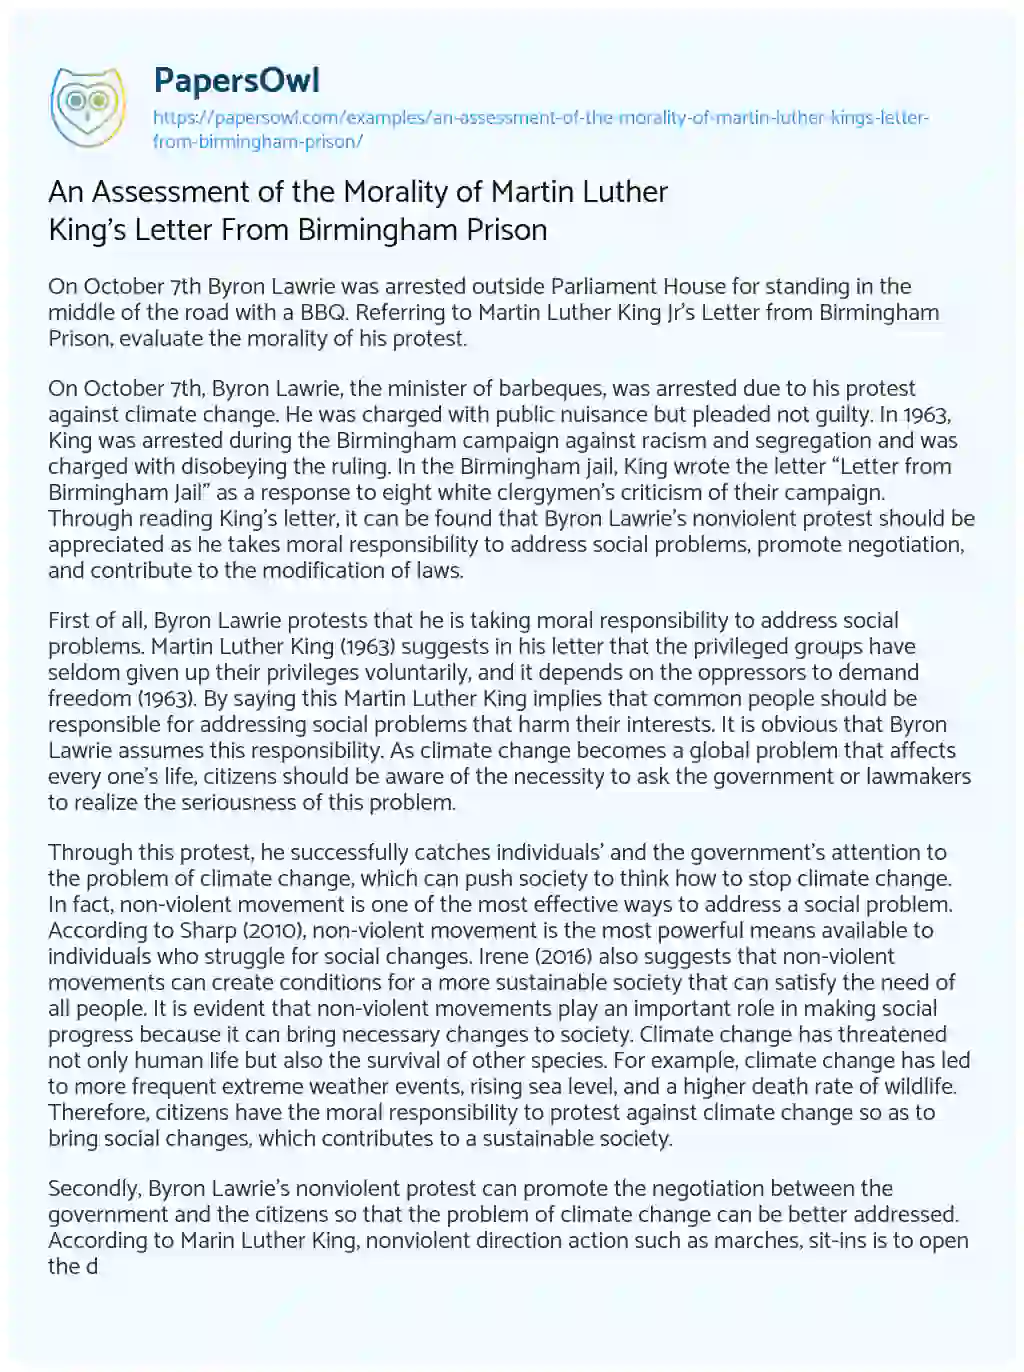 Essay on An Assessment of the Morality of Martin Luther King’s Letter from Birmingham Prison